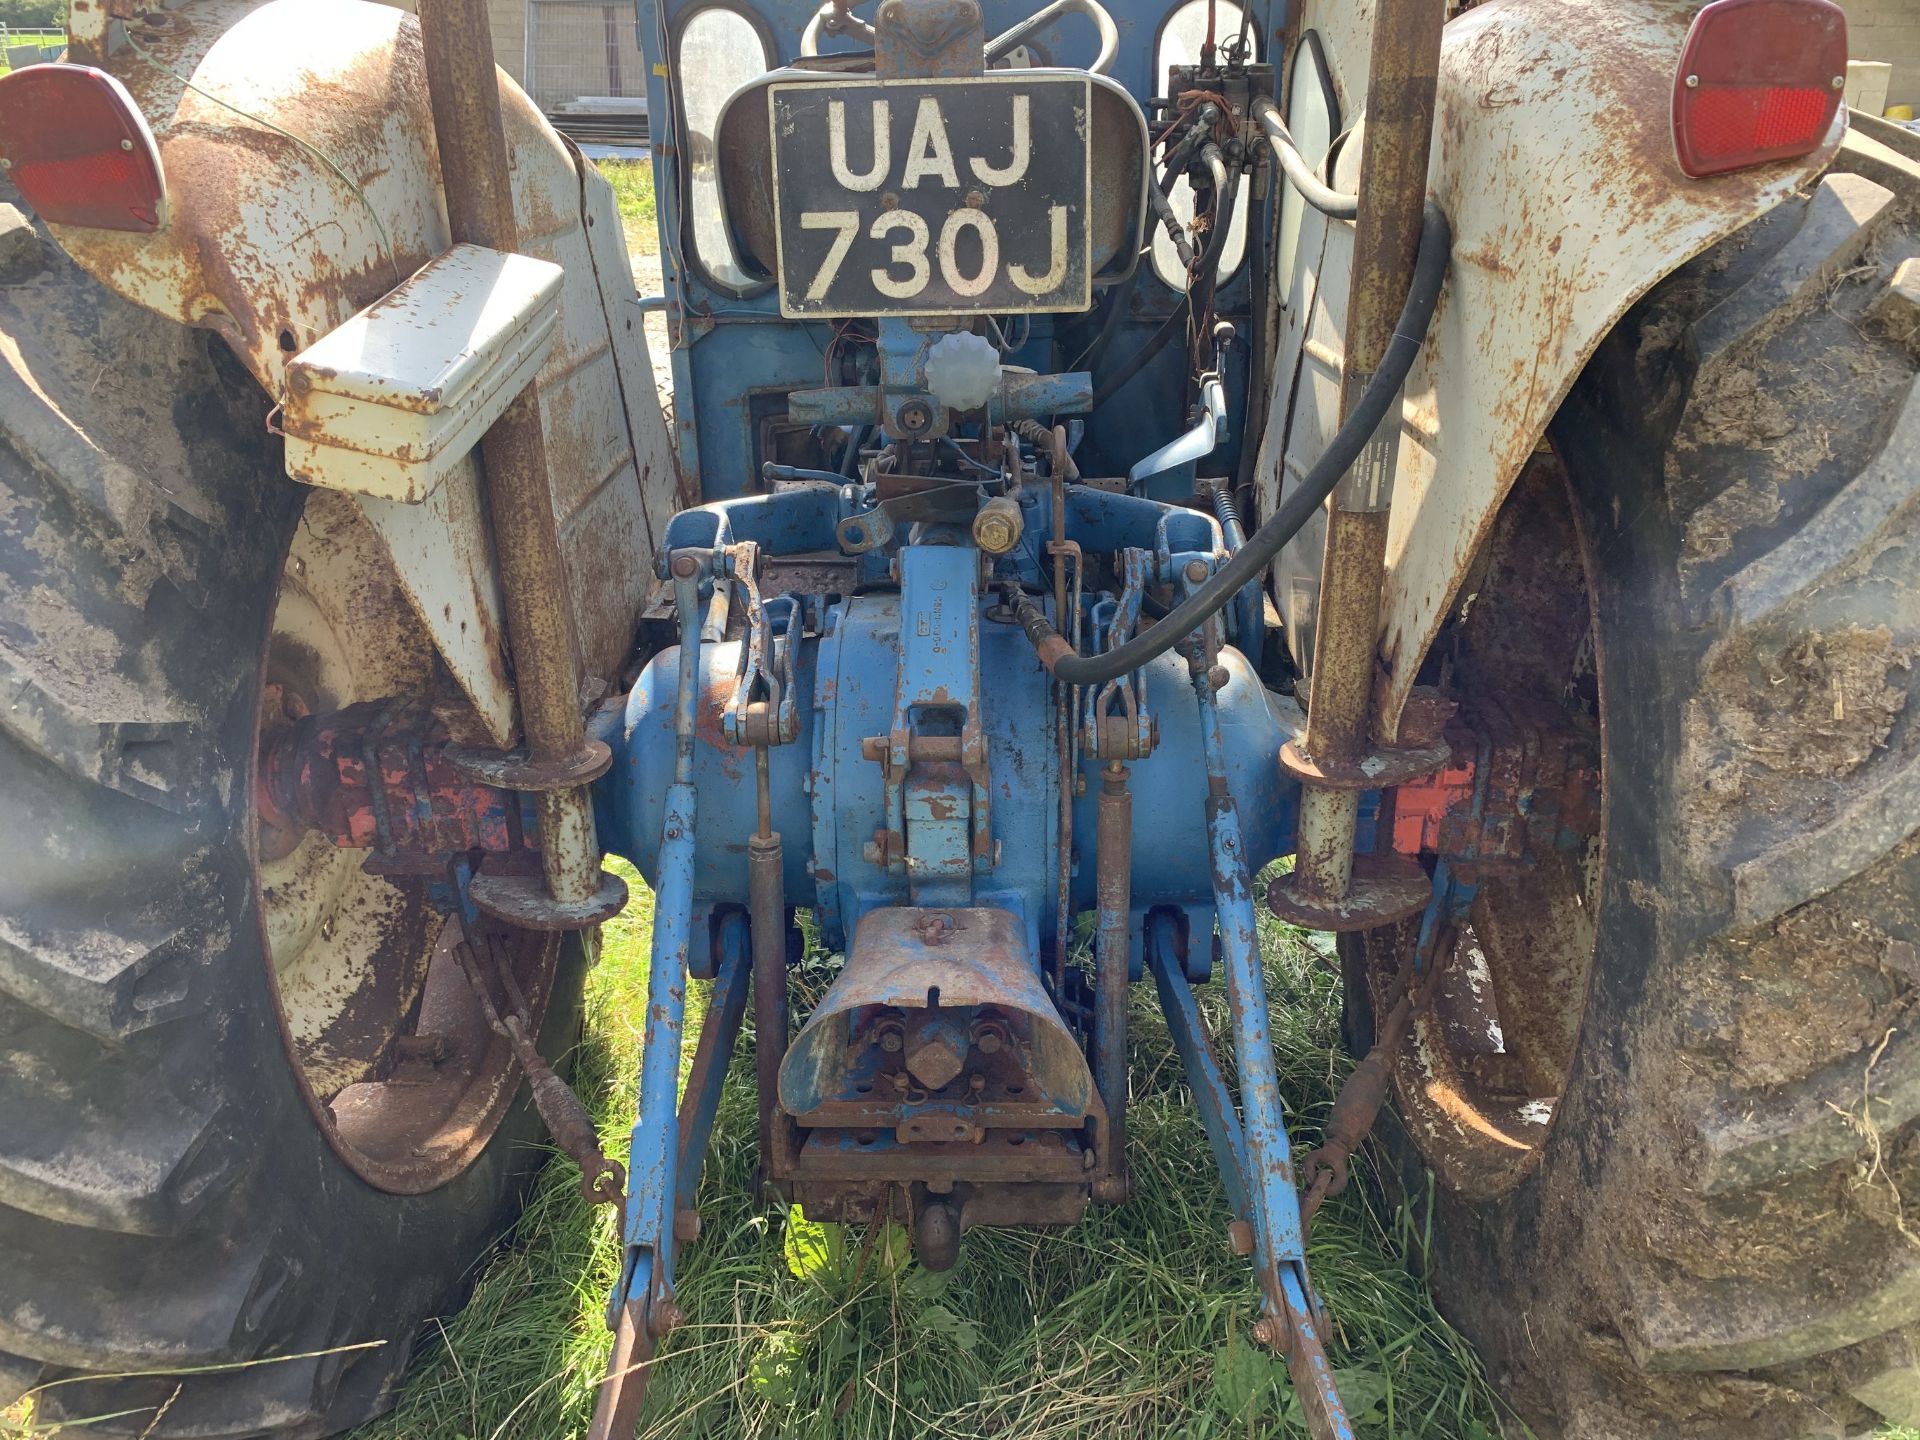 1970 Ford 4000 tractor, UAJ 730J 1970 Ford 4000 tractor with front loader, UAJ 730J, 5288 hours, - Image 4 of 8